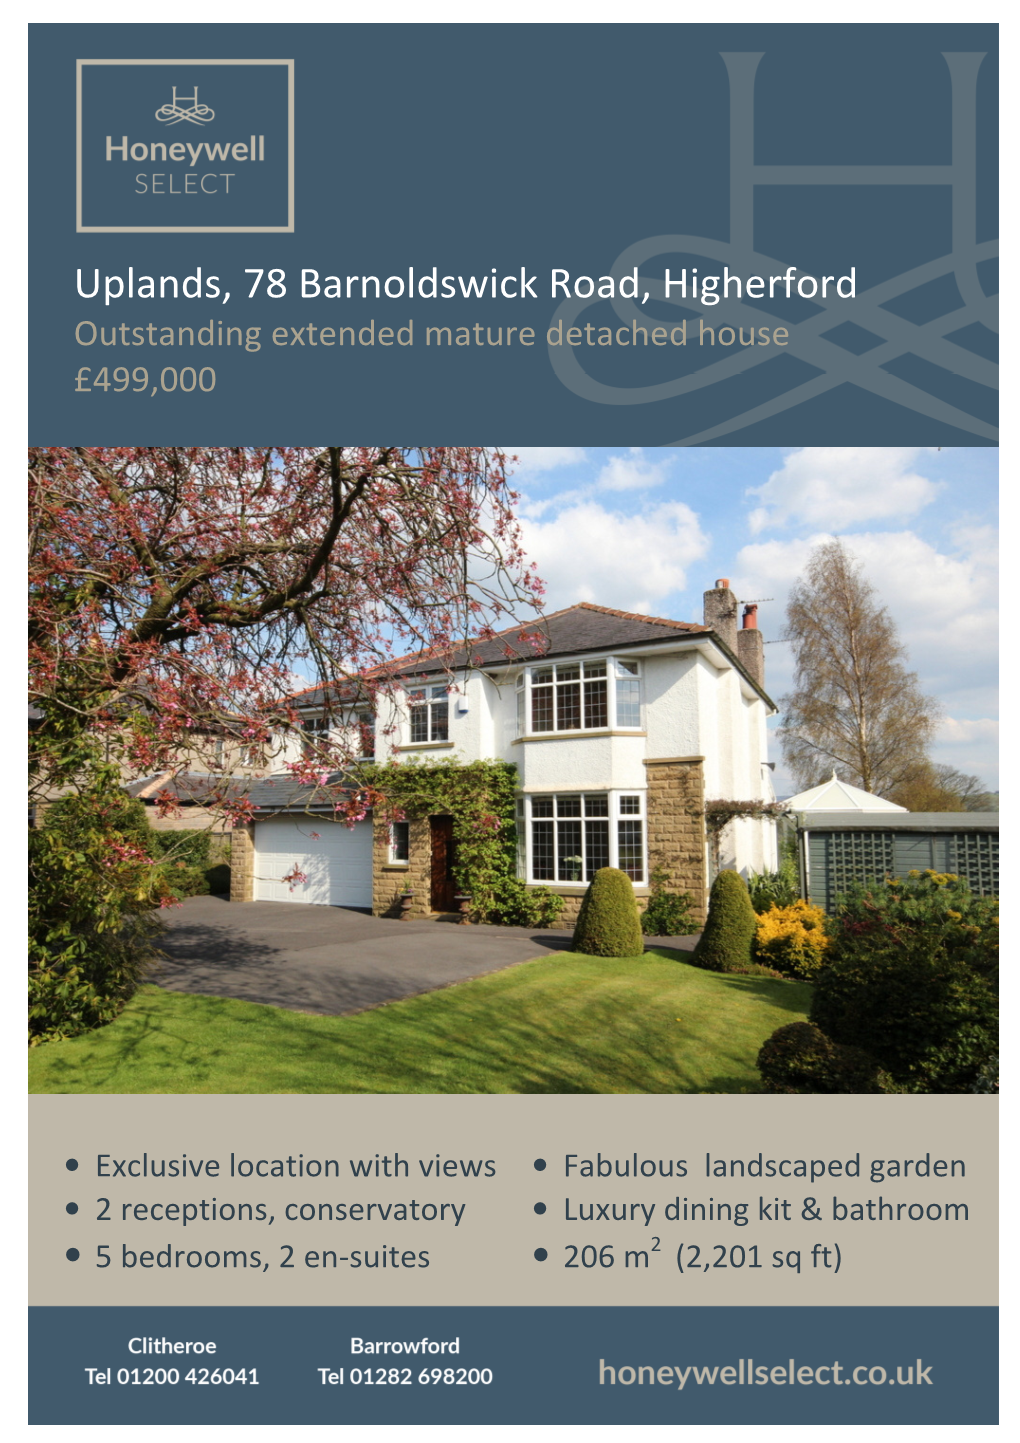 Uplands, 78 Barnoldswick Road, Higherford Outstanding Extended Mature Detached House £499,000